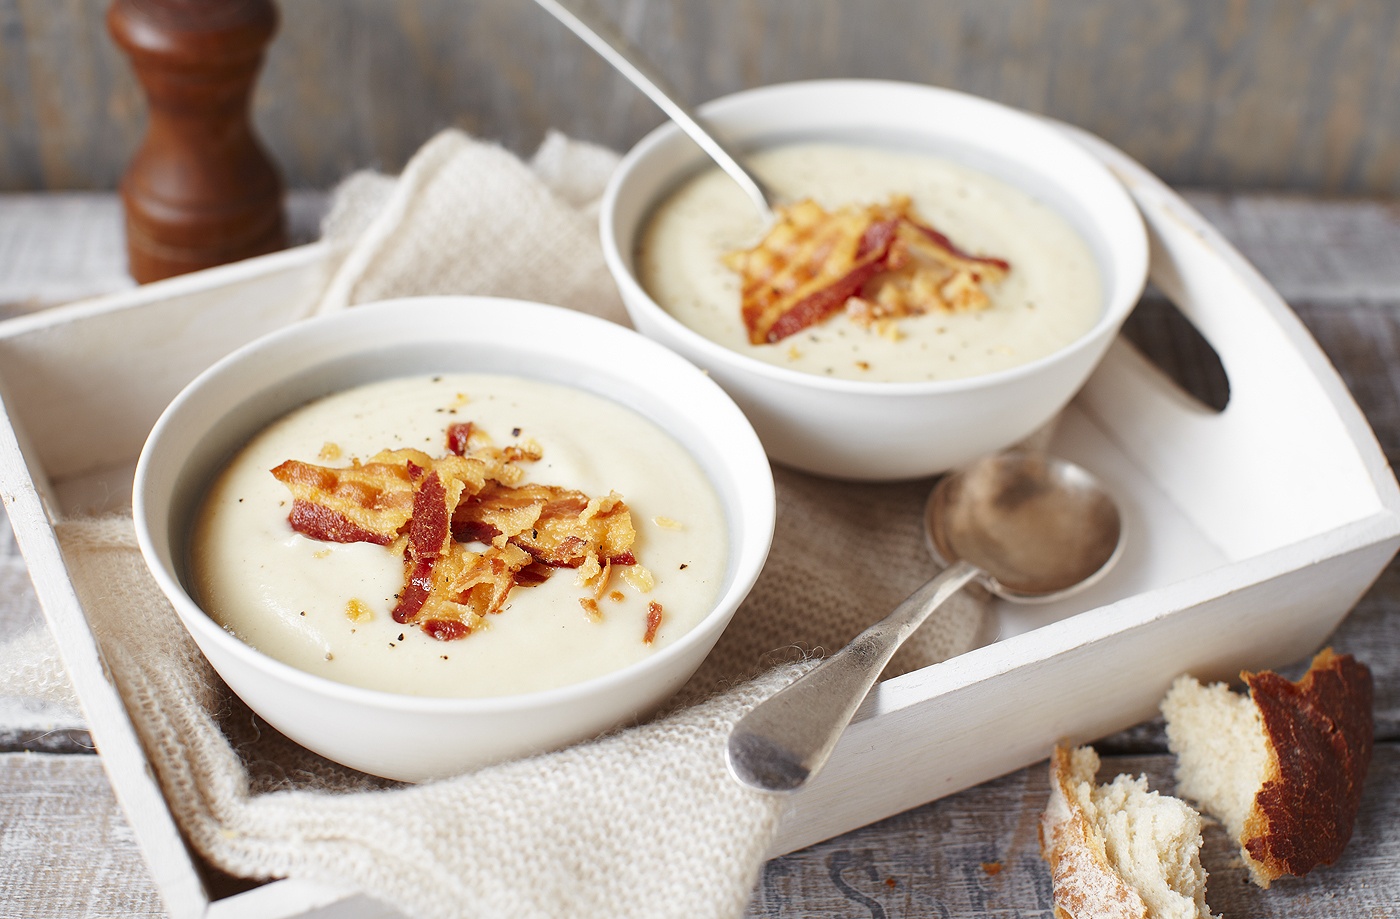 What’s Your IQ, Based Only on Your Dinner Choices? Cauliflower cheese soup